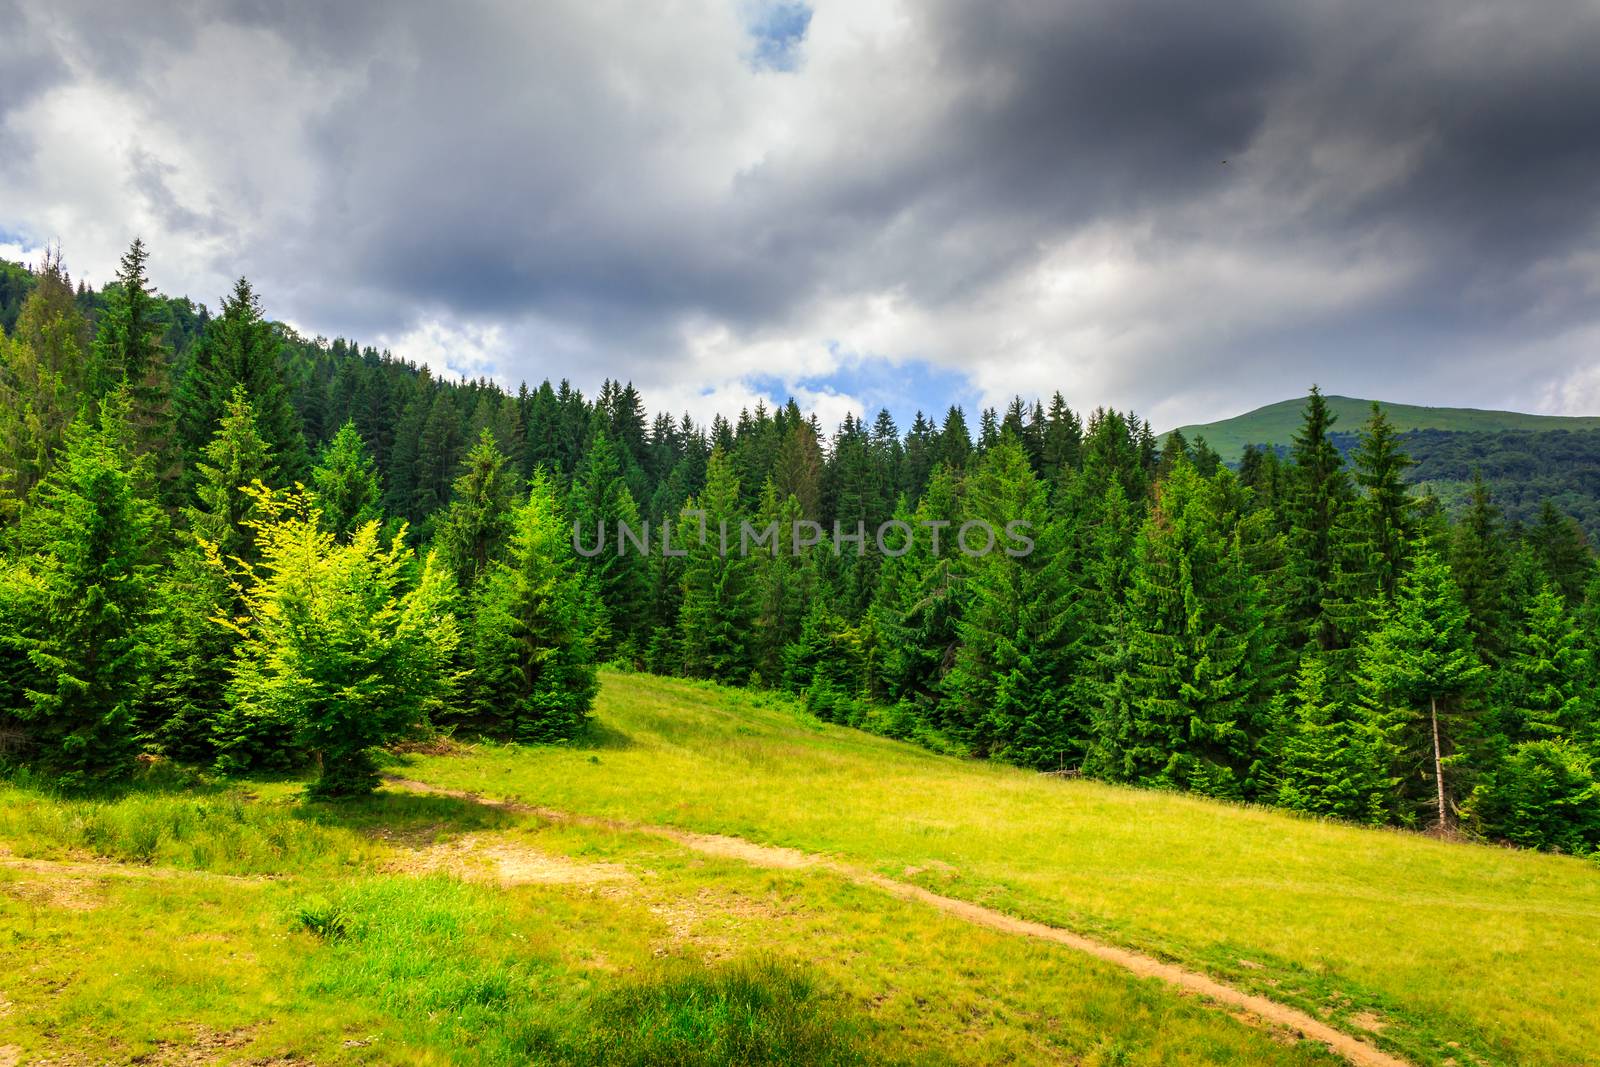 a large clearing with a footpath in a coniferous forest in the mountains. the sky is filled with clouds before the storm.